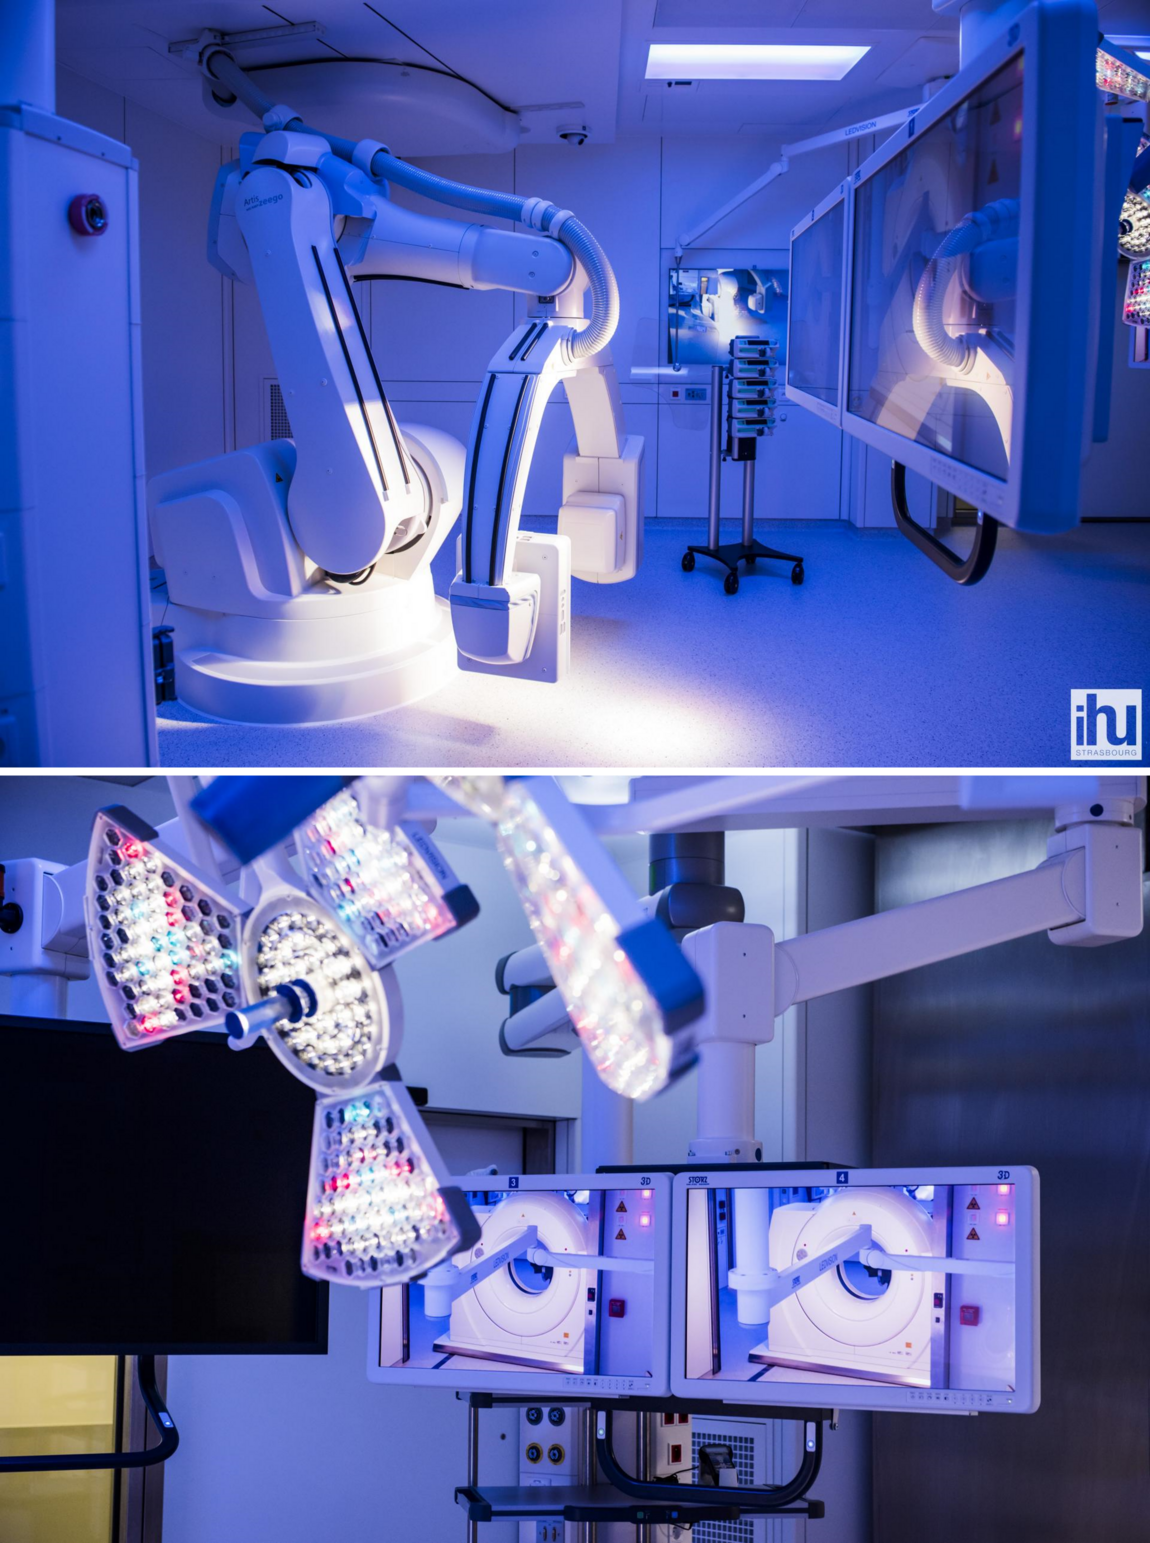 Photograph of medical imaging equipment from IHU Strasbourg 